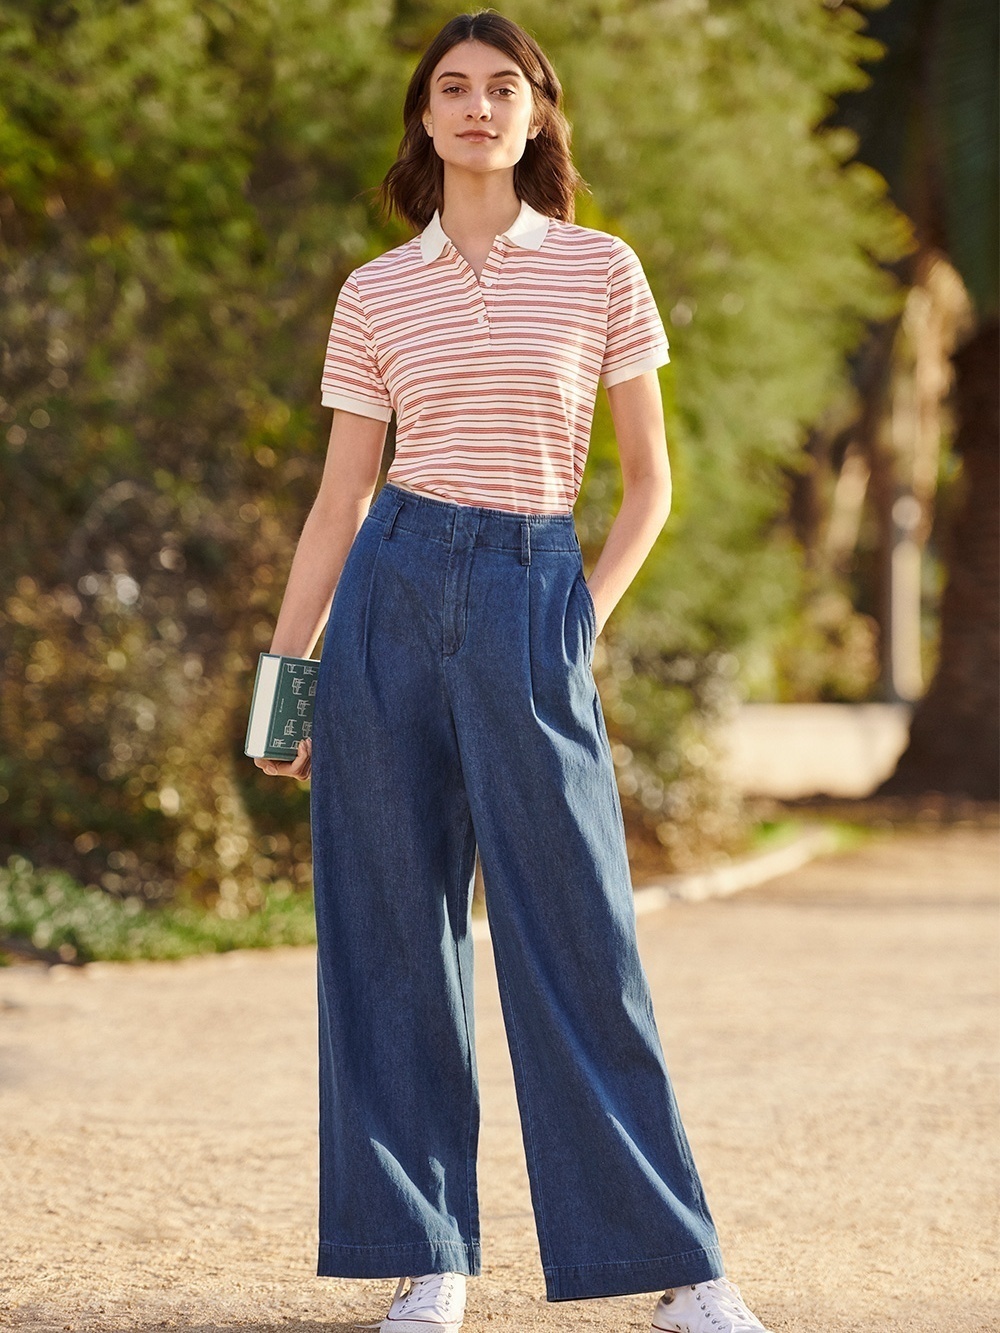 8 Palazzo Pants Style That Every Women Should Try